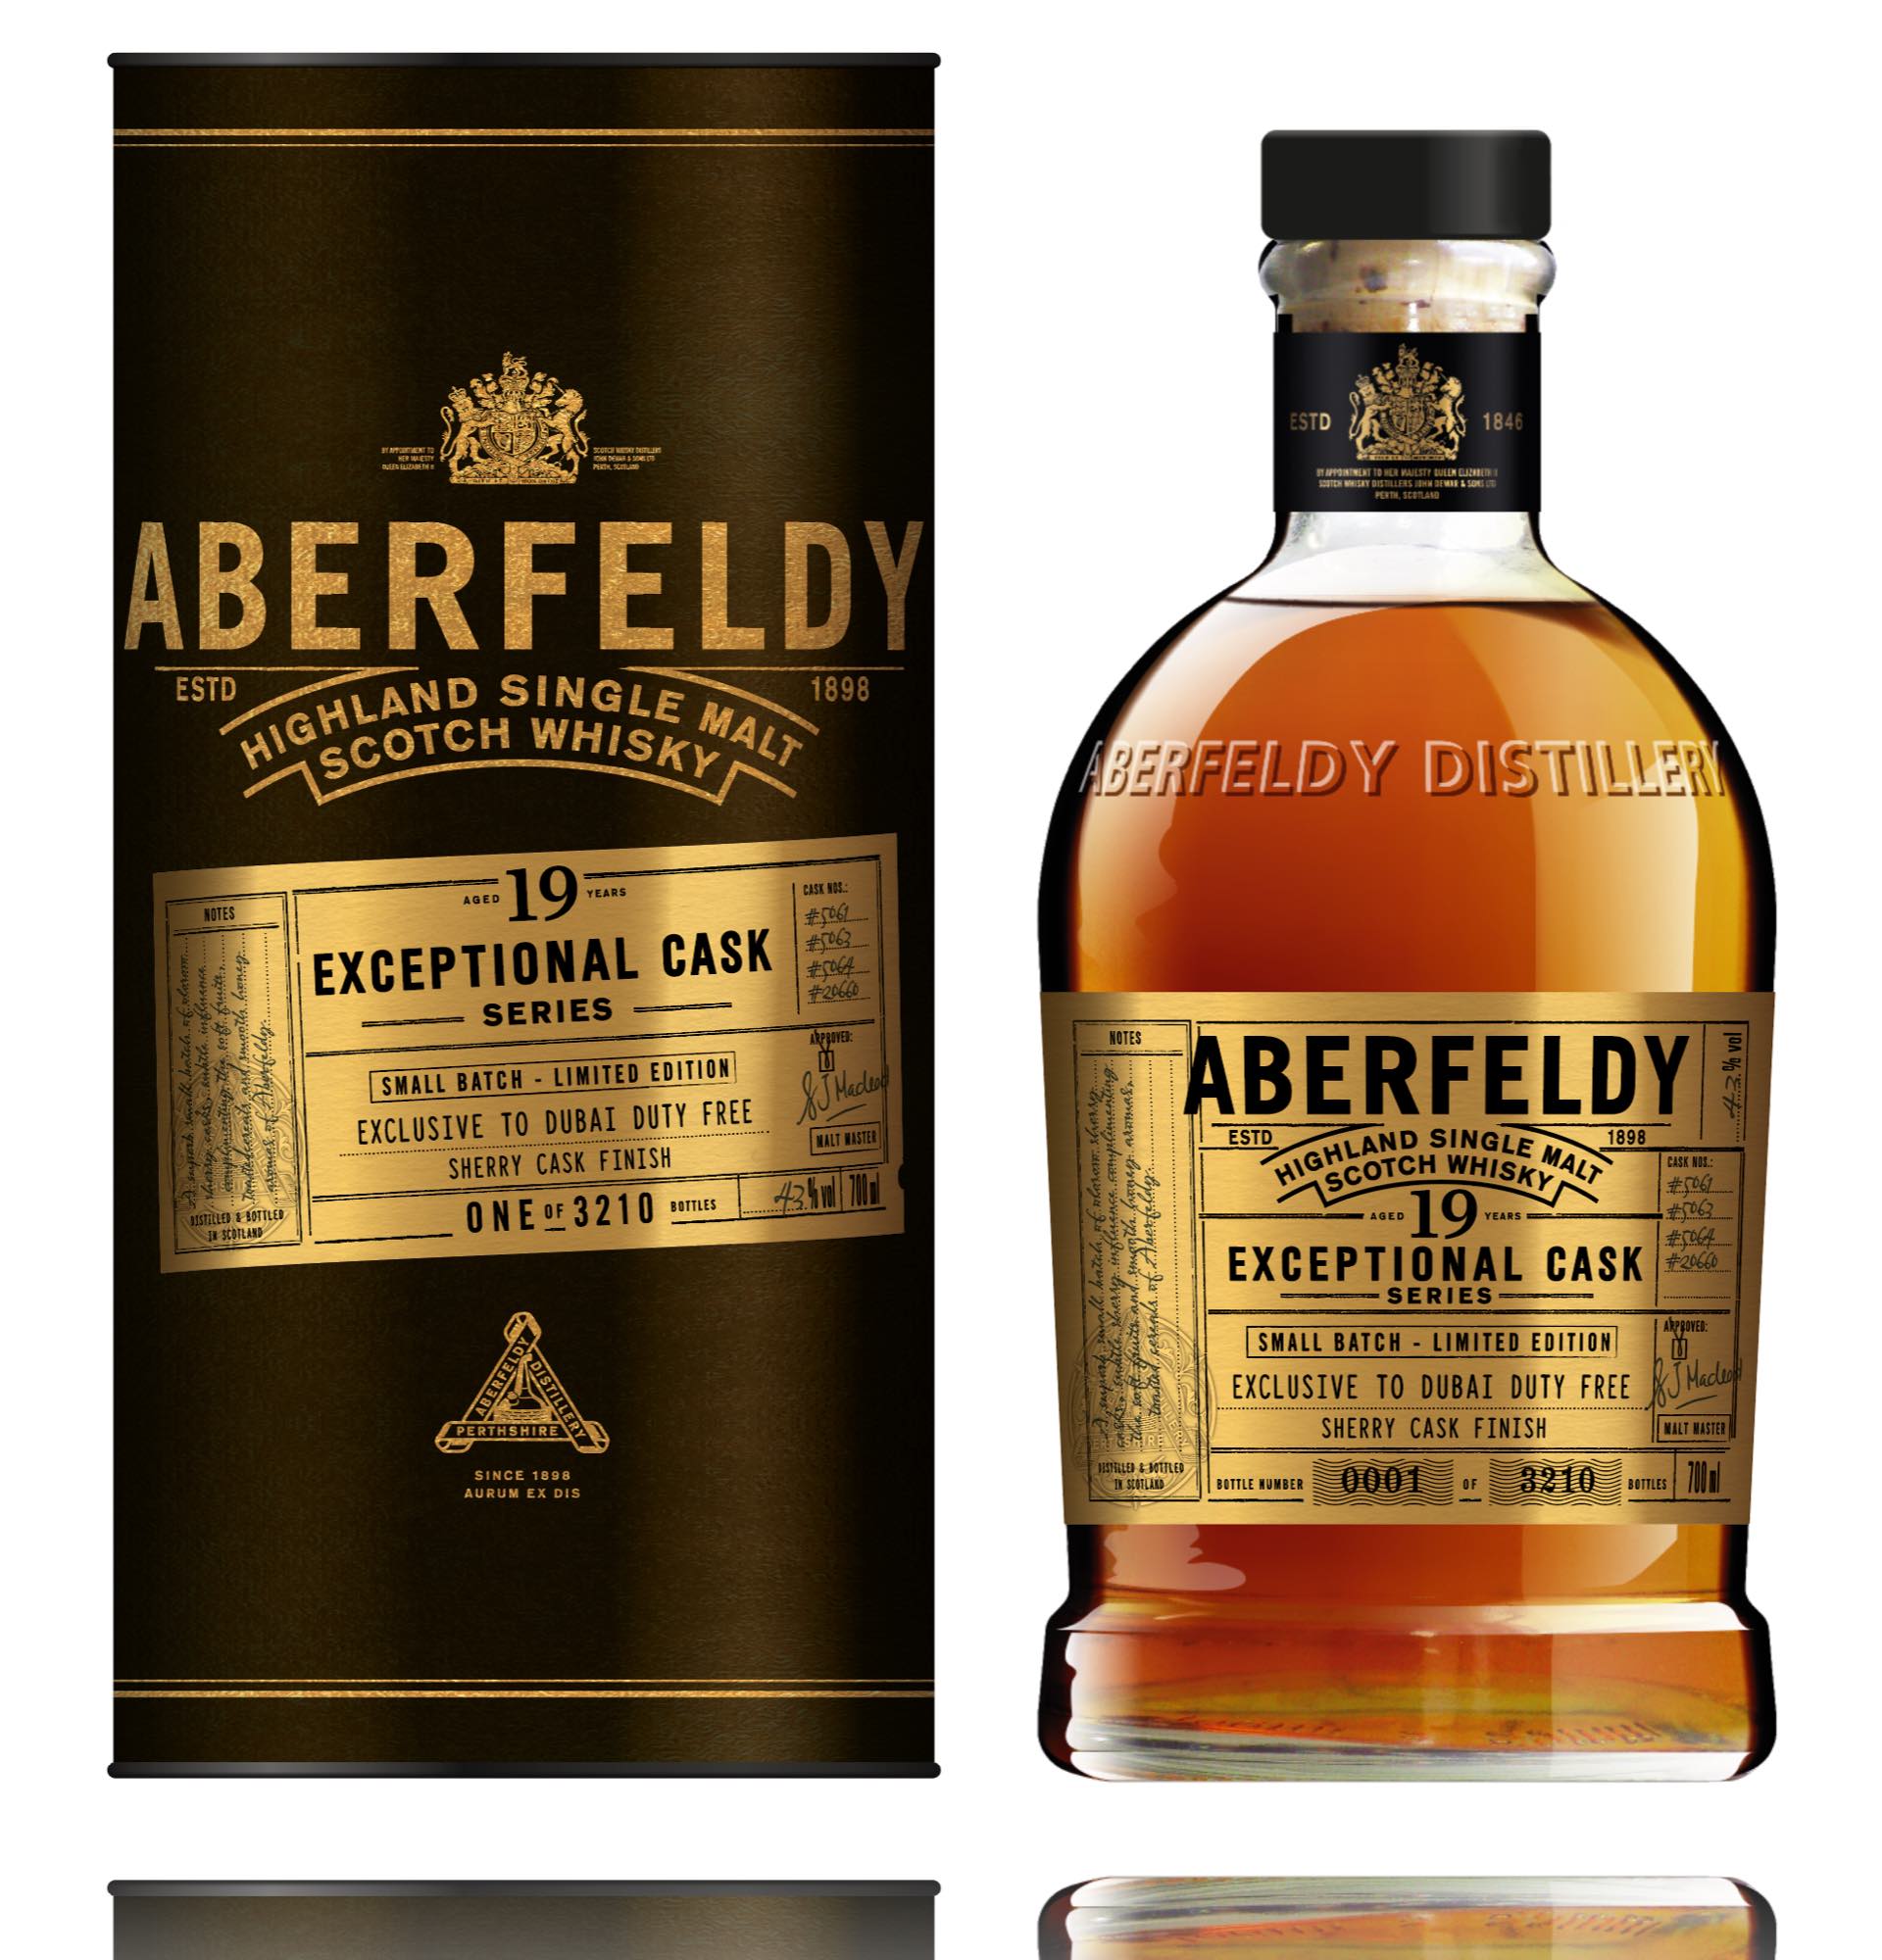 Aberfeldy Exceptional Cask 19 Year Old Sherry Finish